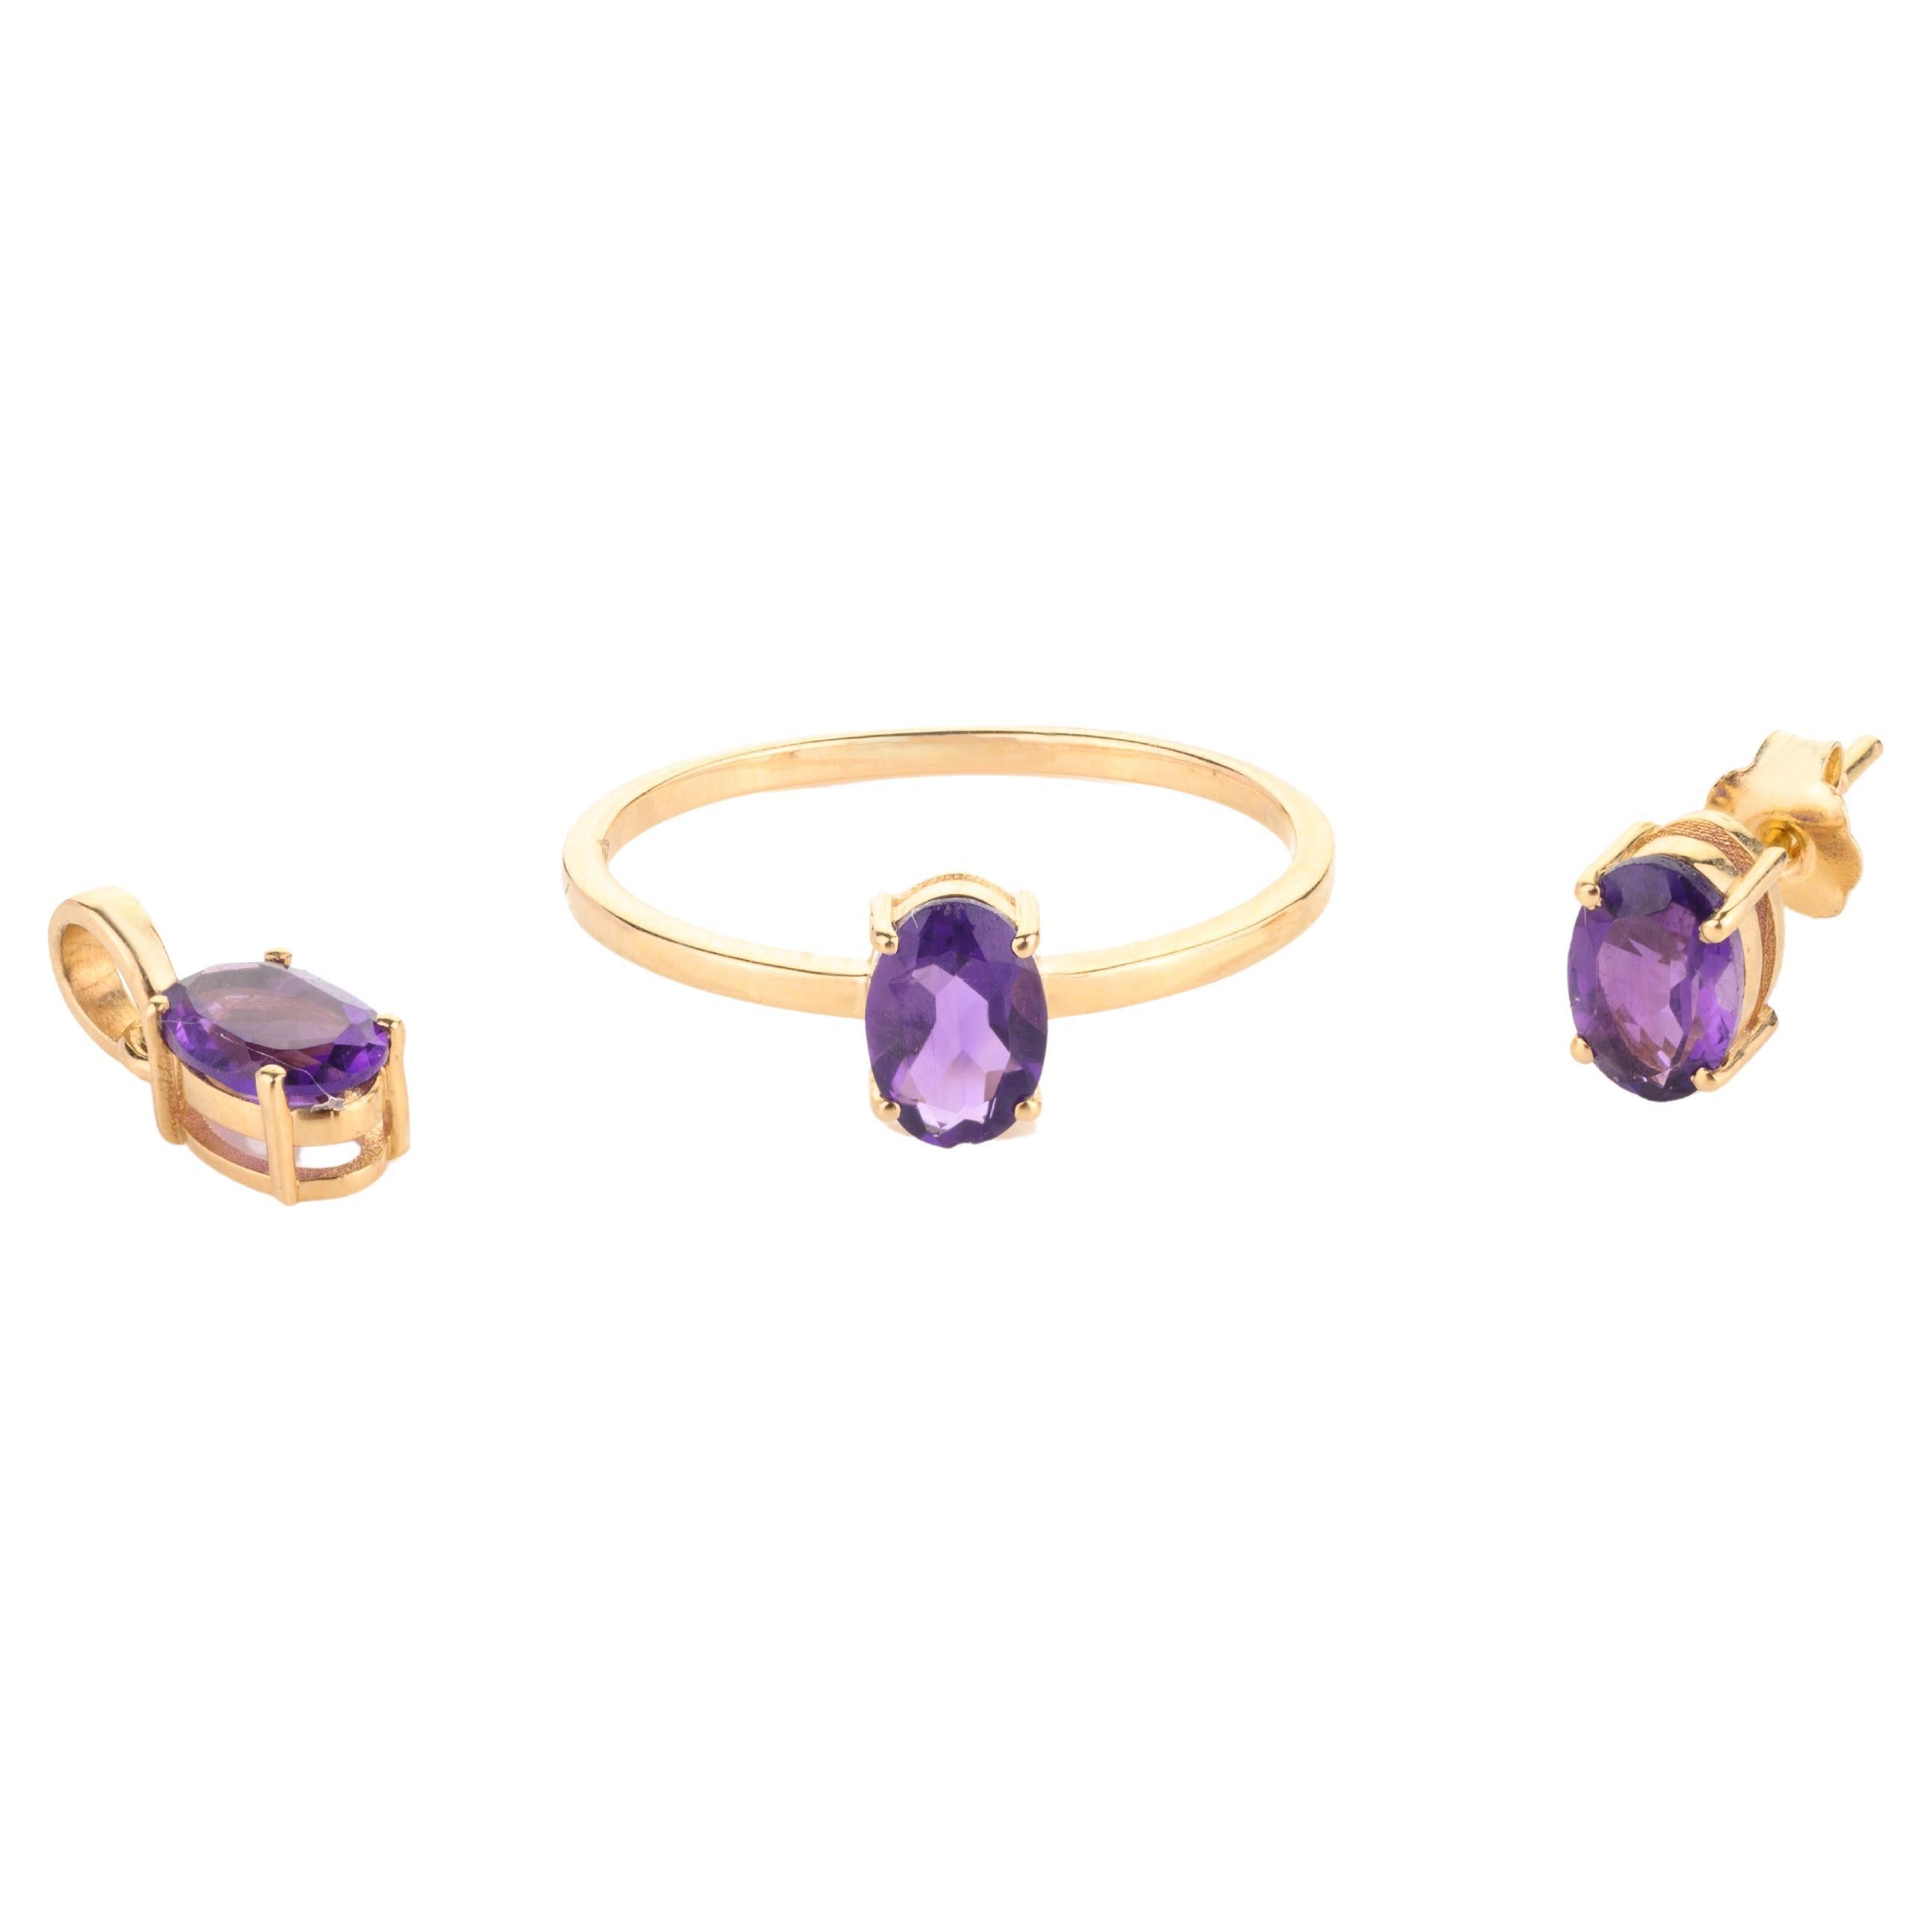 For Sale:  18k Solid Yellow Gold Amethyst Ring, Pendant and Earring Jewelry Set Gift 2